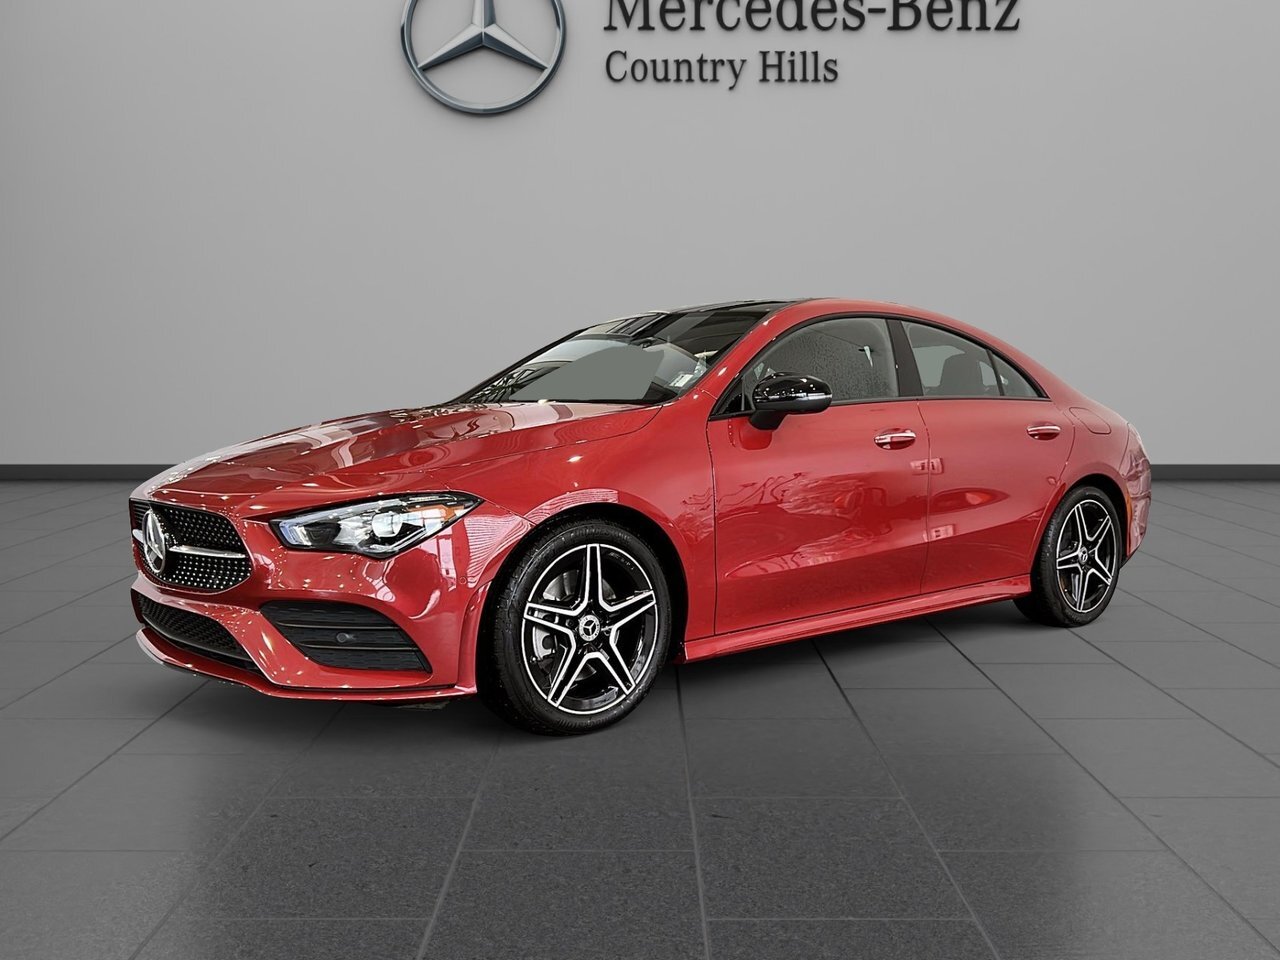 2023 Mercedes-Benz CLA250 4MATIC Coupe Warranty until 2029 + $12k in options